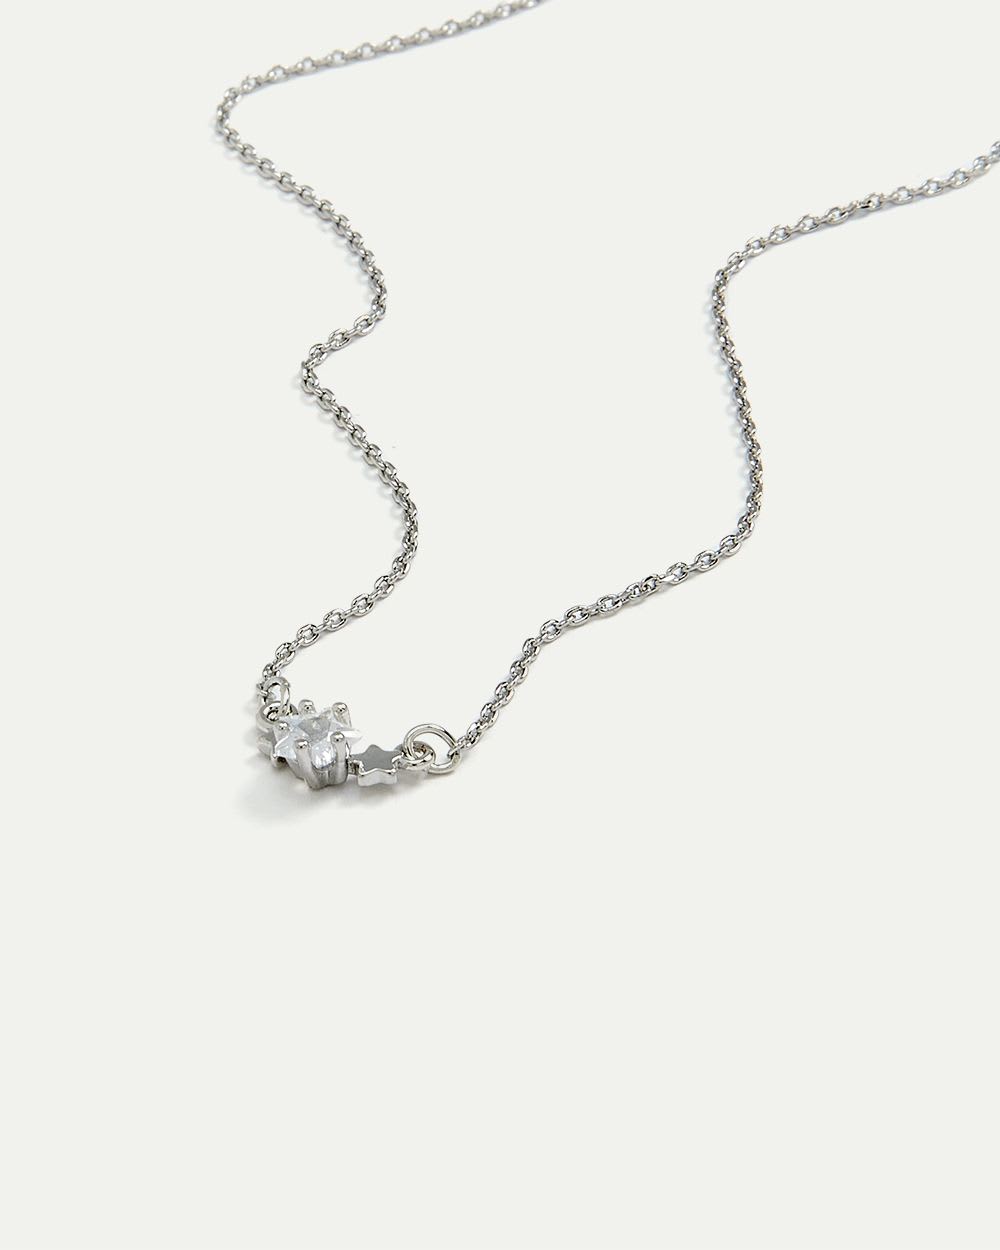 Delicate Necklace with Small Star